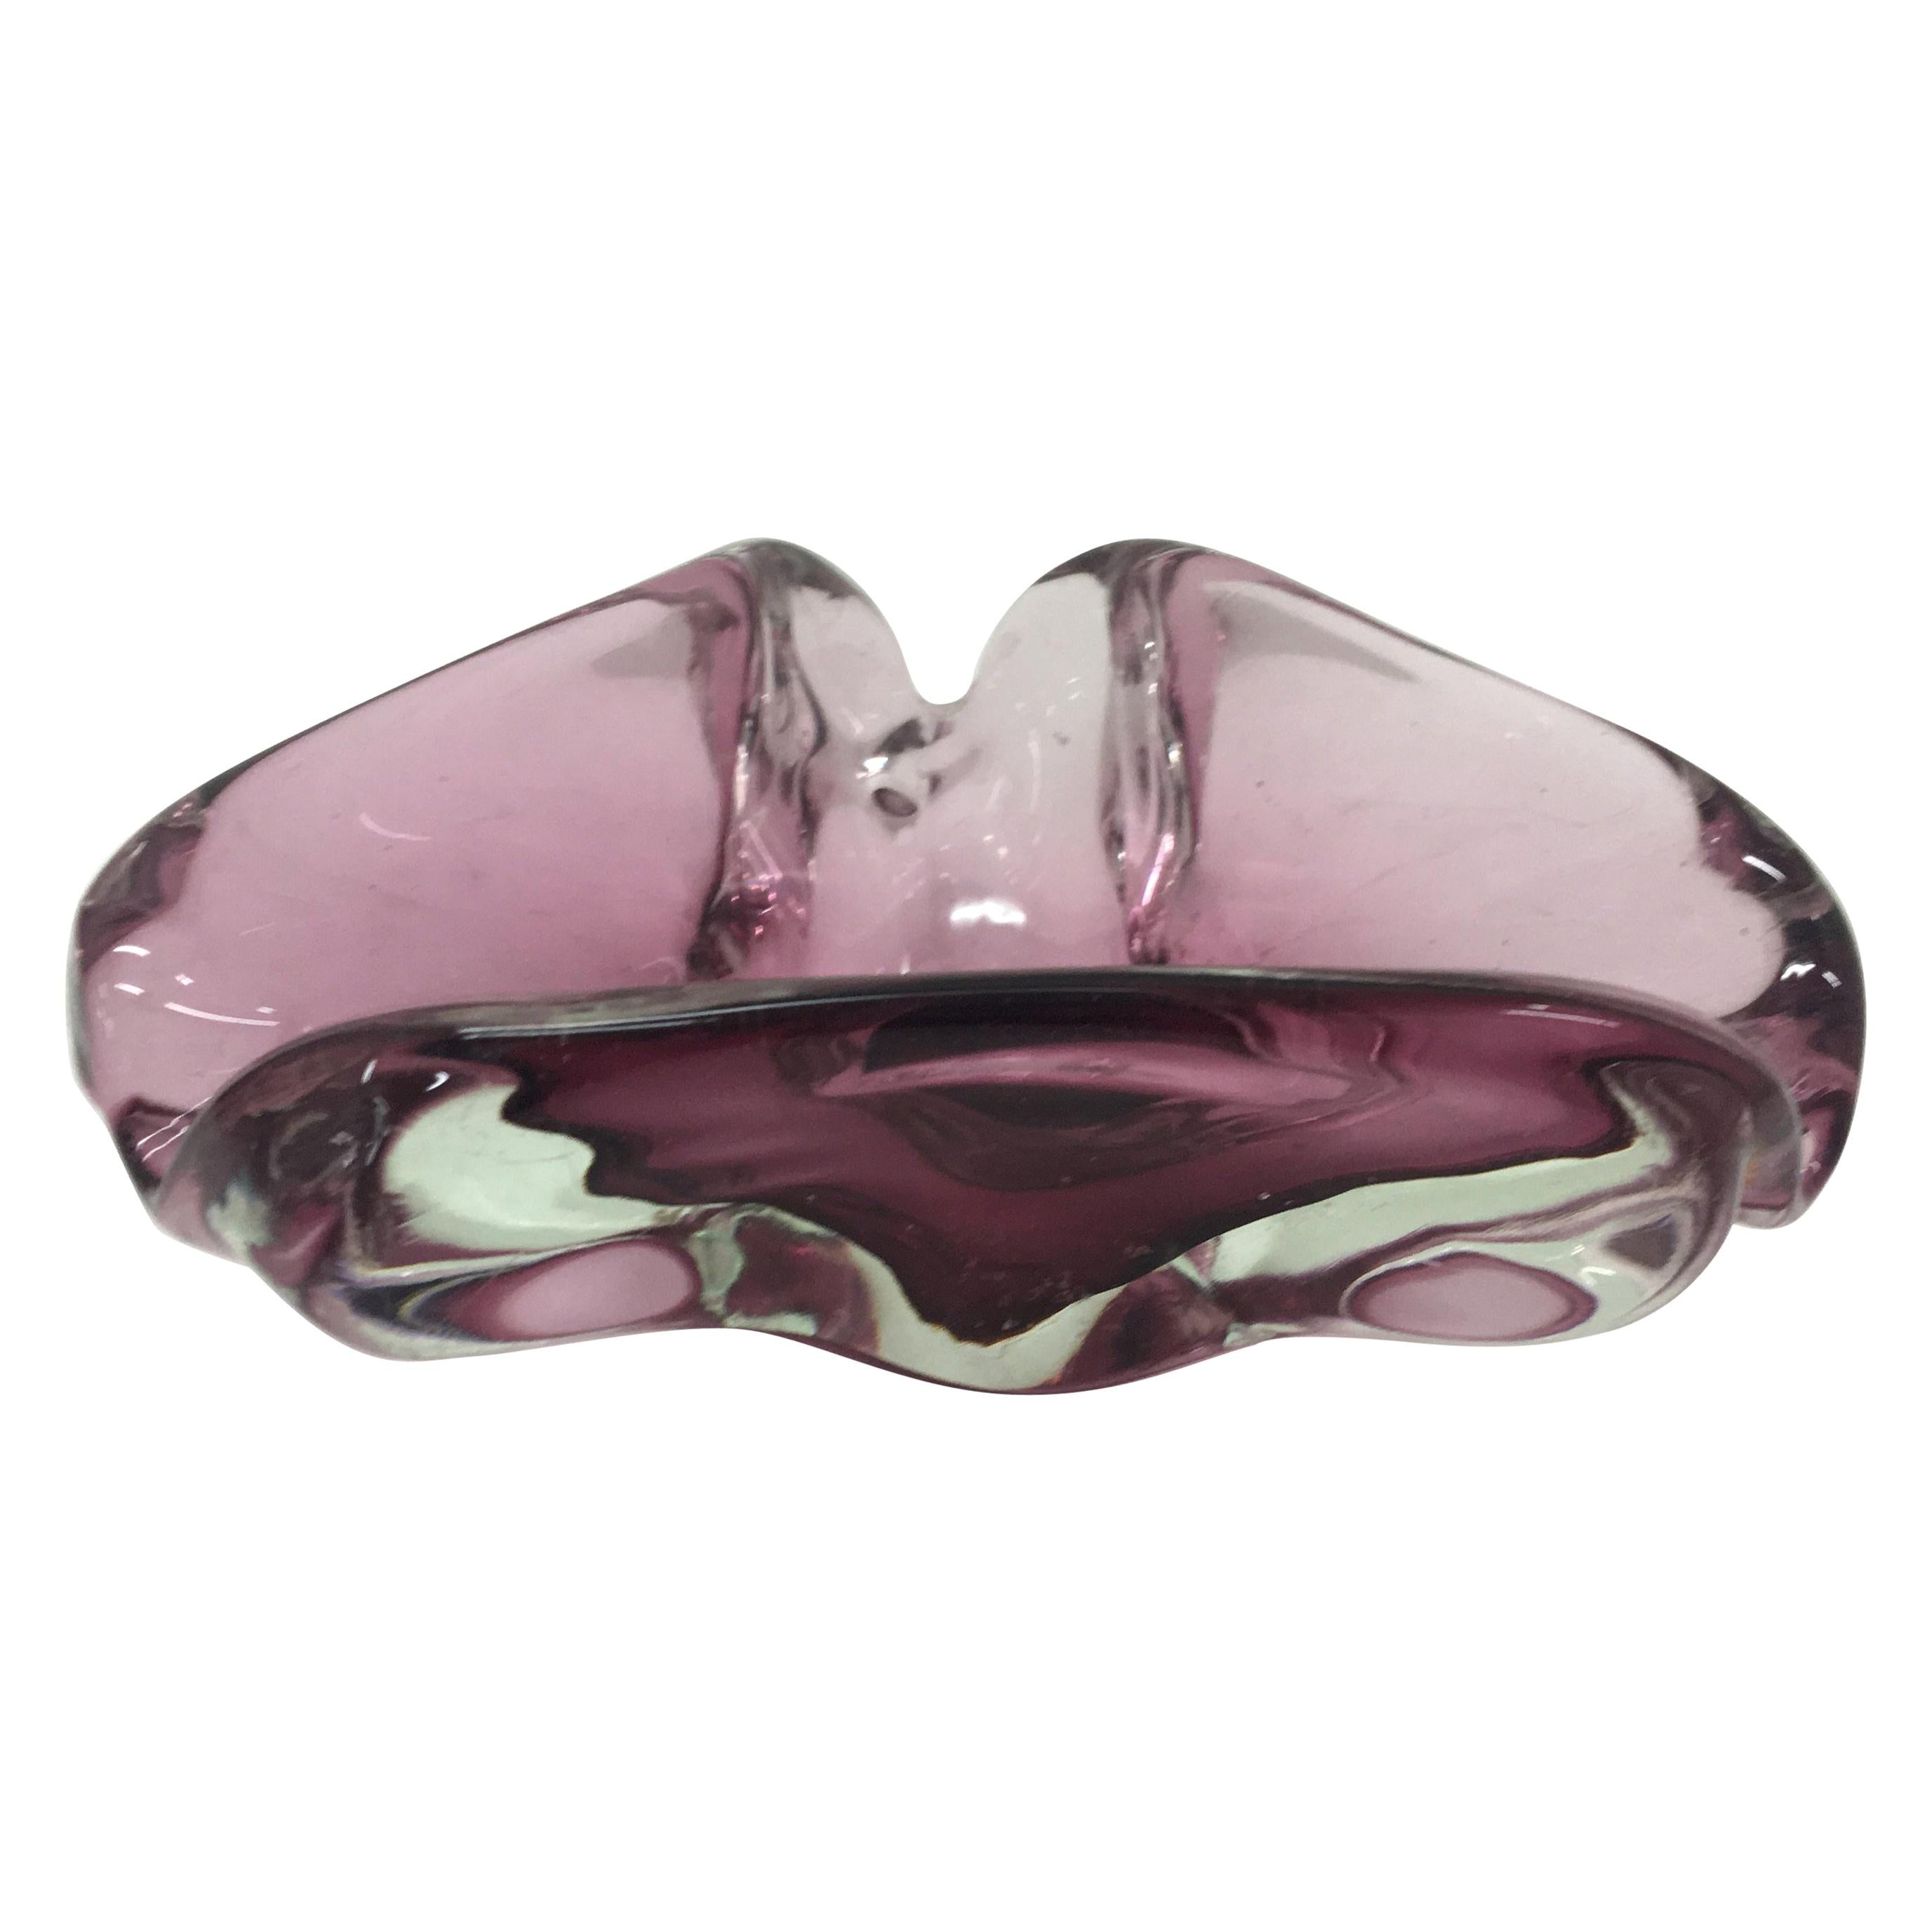 This is a Sommerso Purple and transparent Murano glass ashtray designed and manufactured in Italy in the Seventies by Seguso. The ashtray it's in perfect conditions. The ashtray crafted from Murano glass, a renowned type of glass produced on the